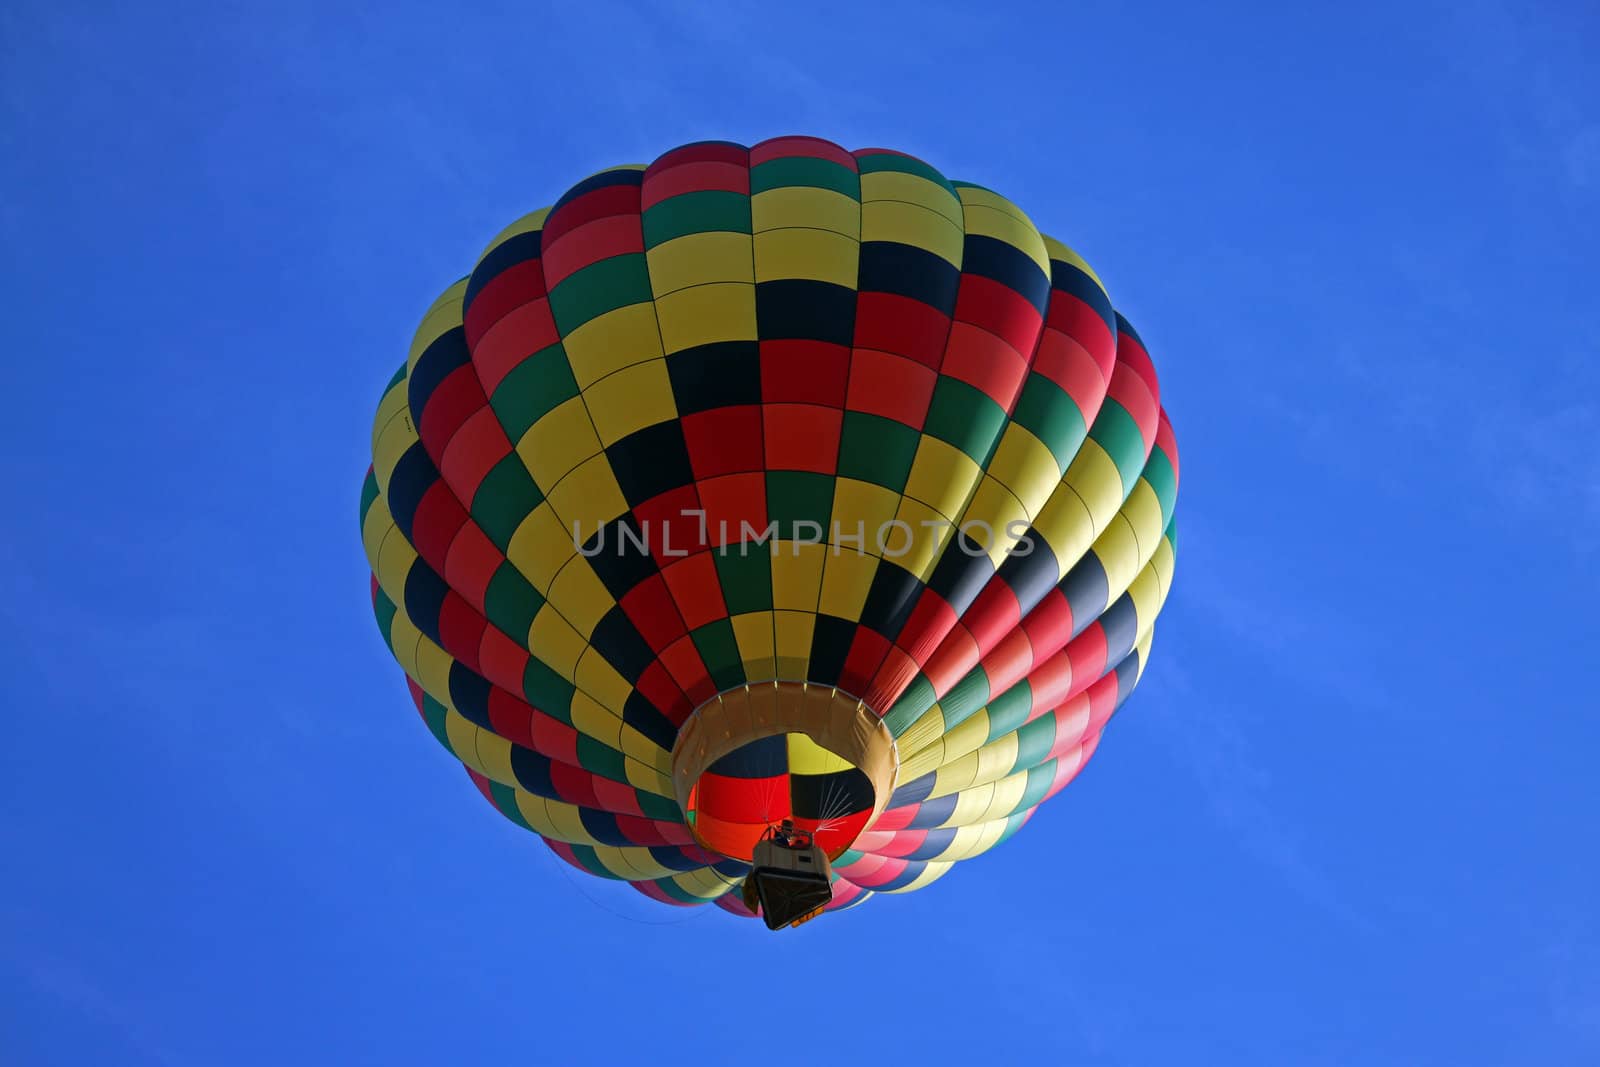 Hot air balloon on blue background with red black and yellow highlights.